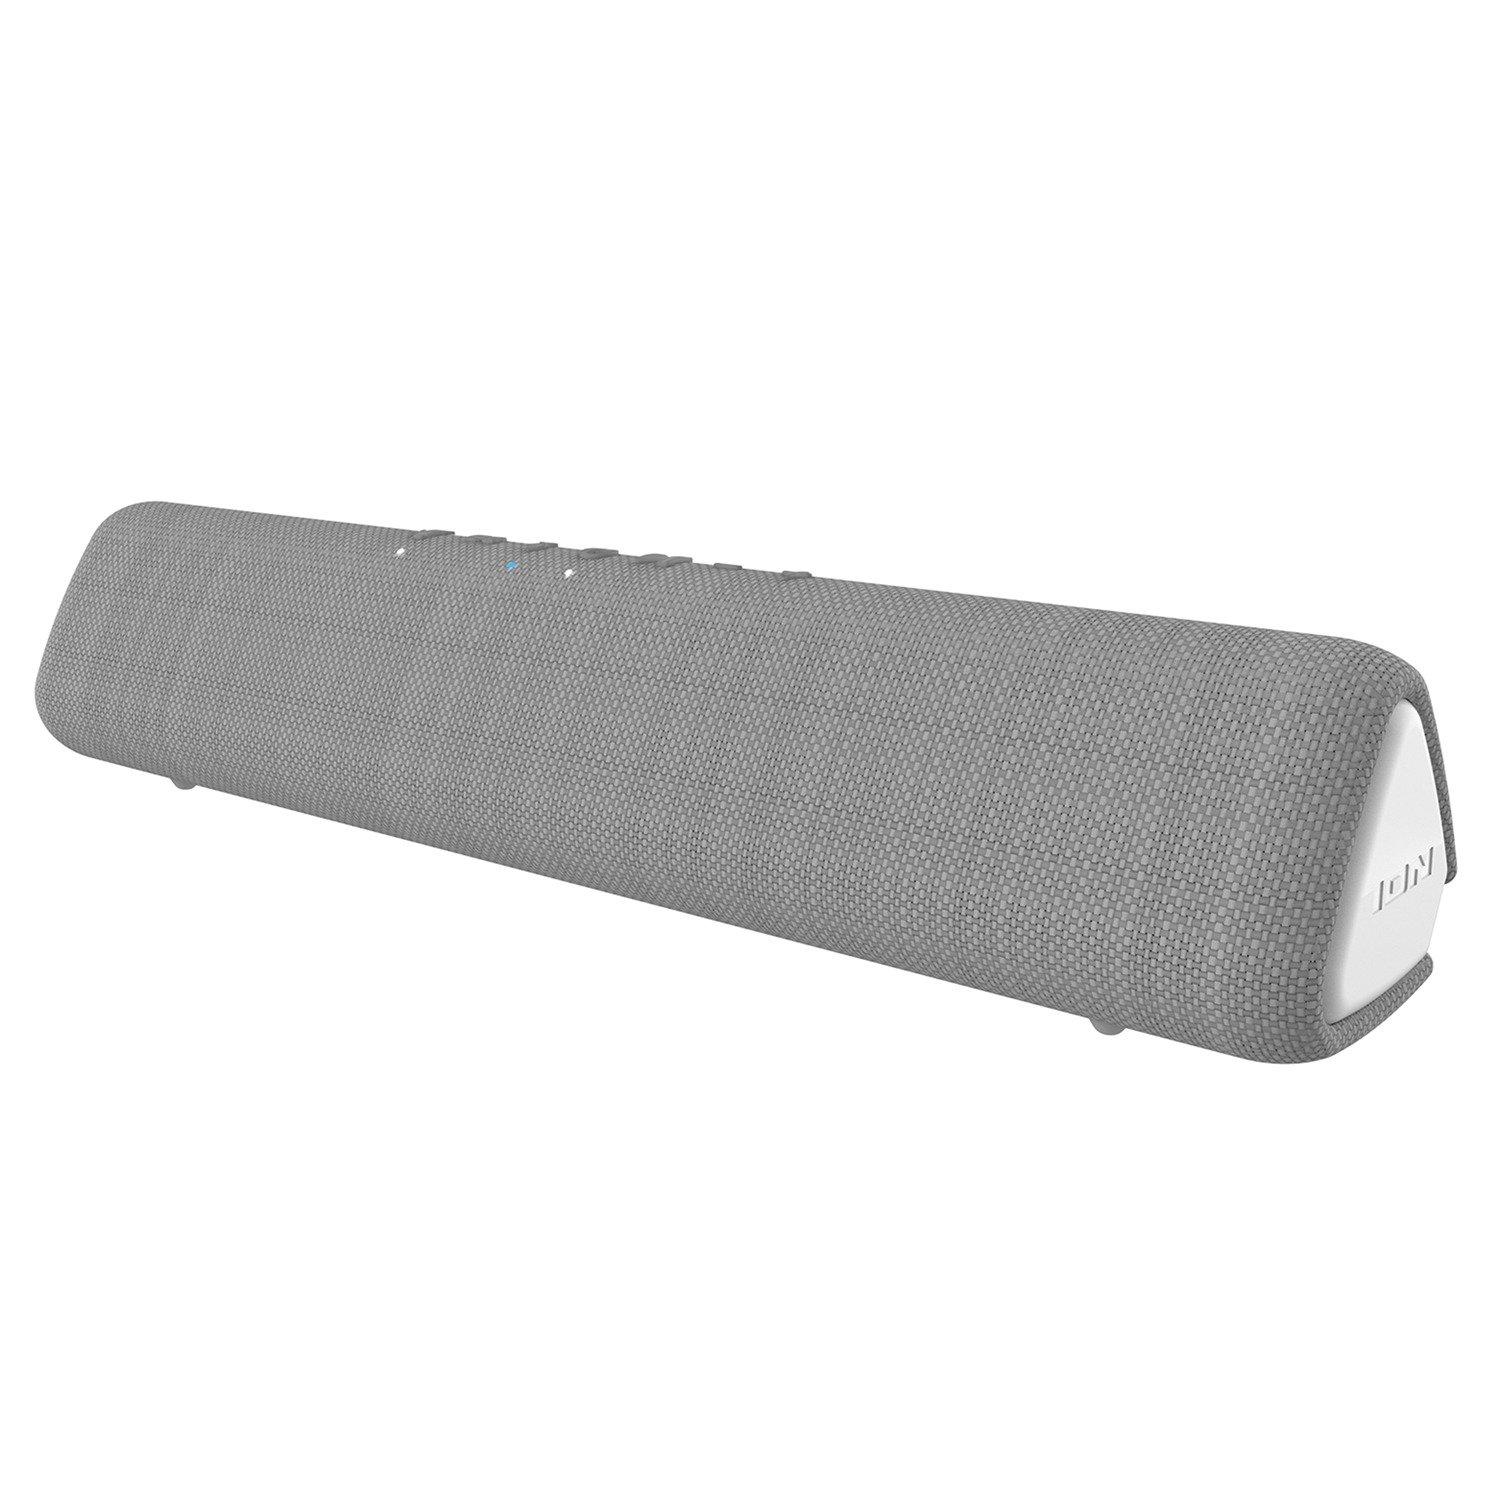 list item 1 of 6 ION Meeting Mate Bluetooth Speaker with Microphone and Stand